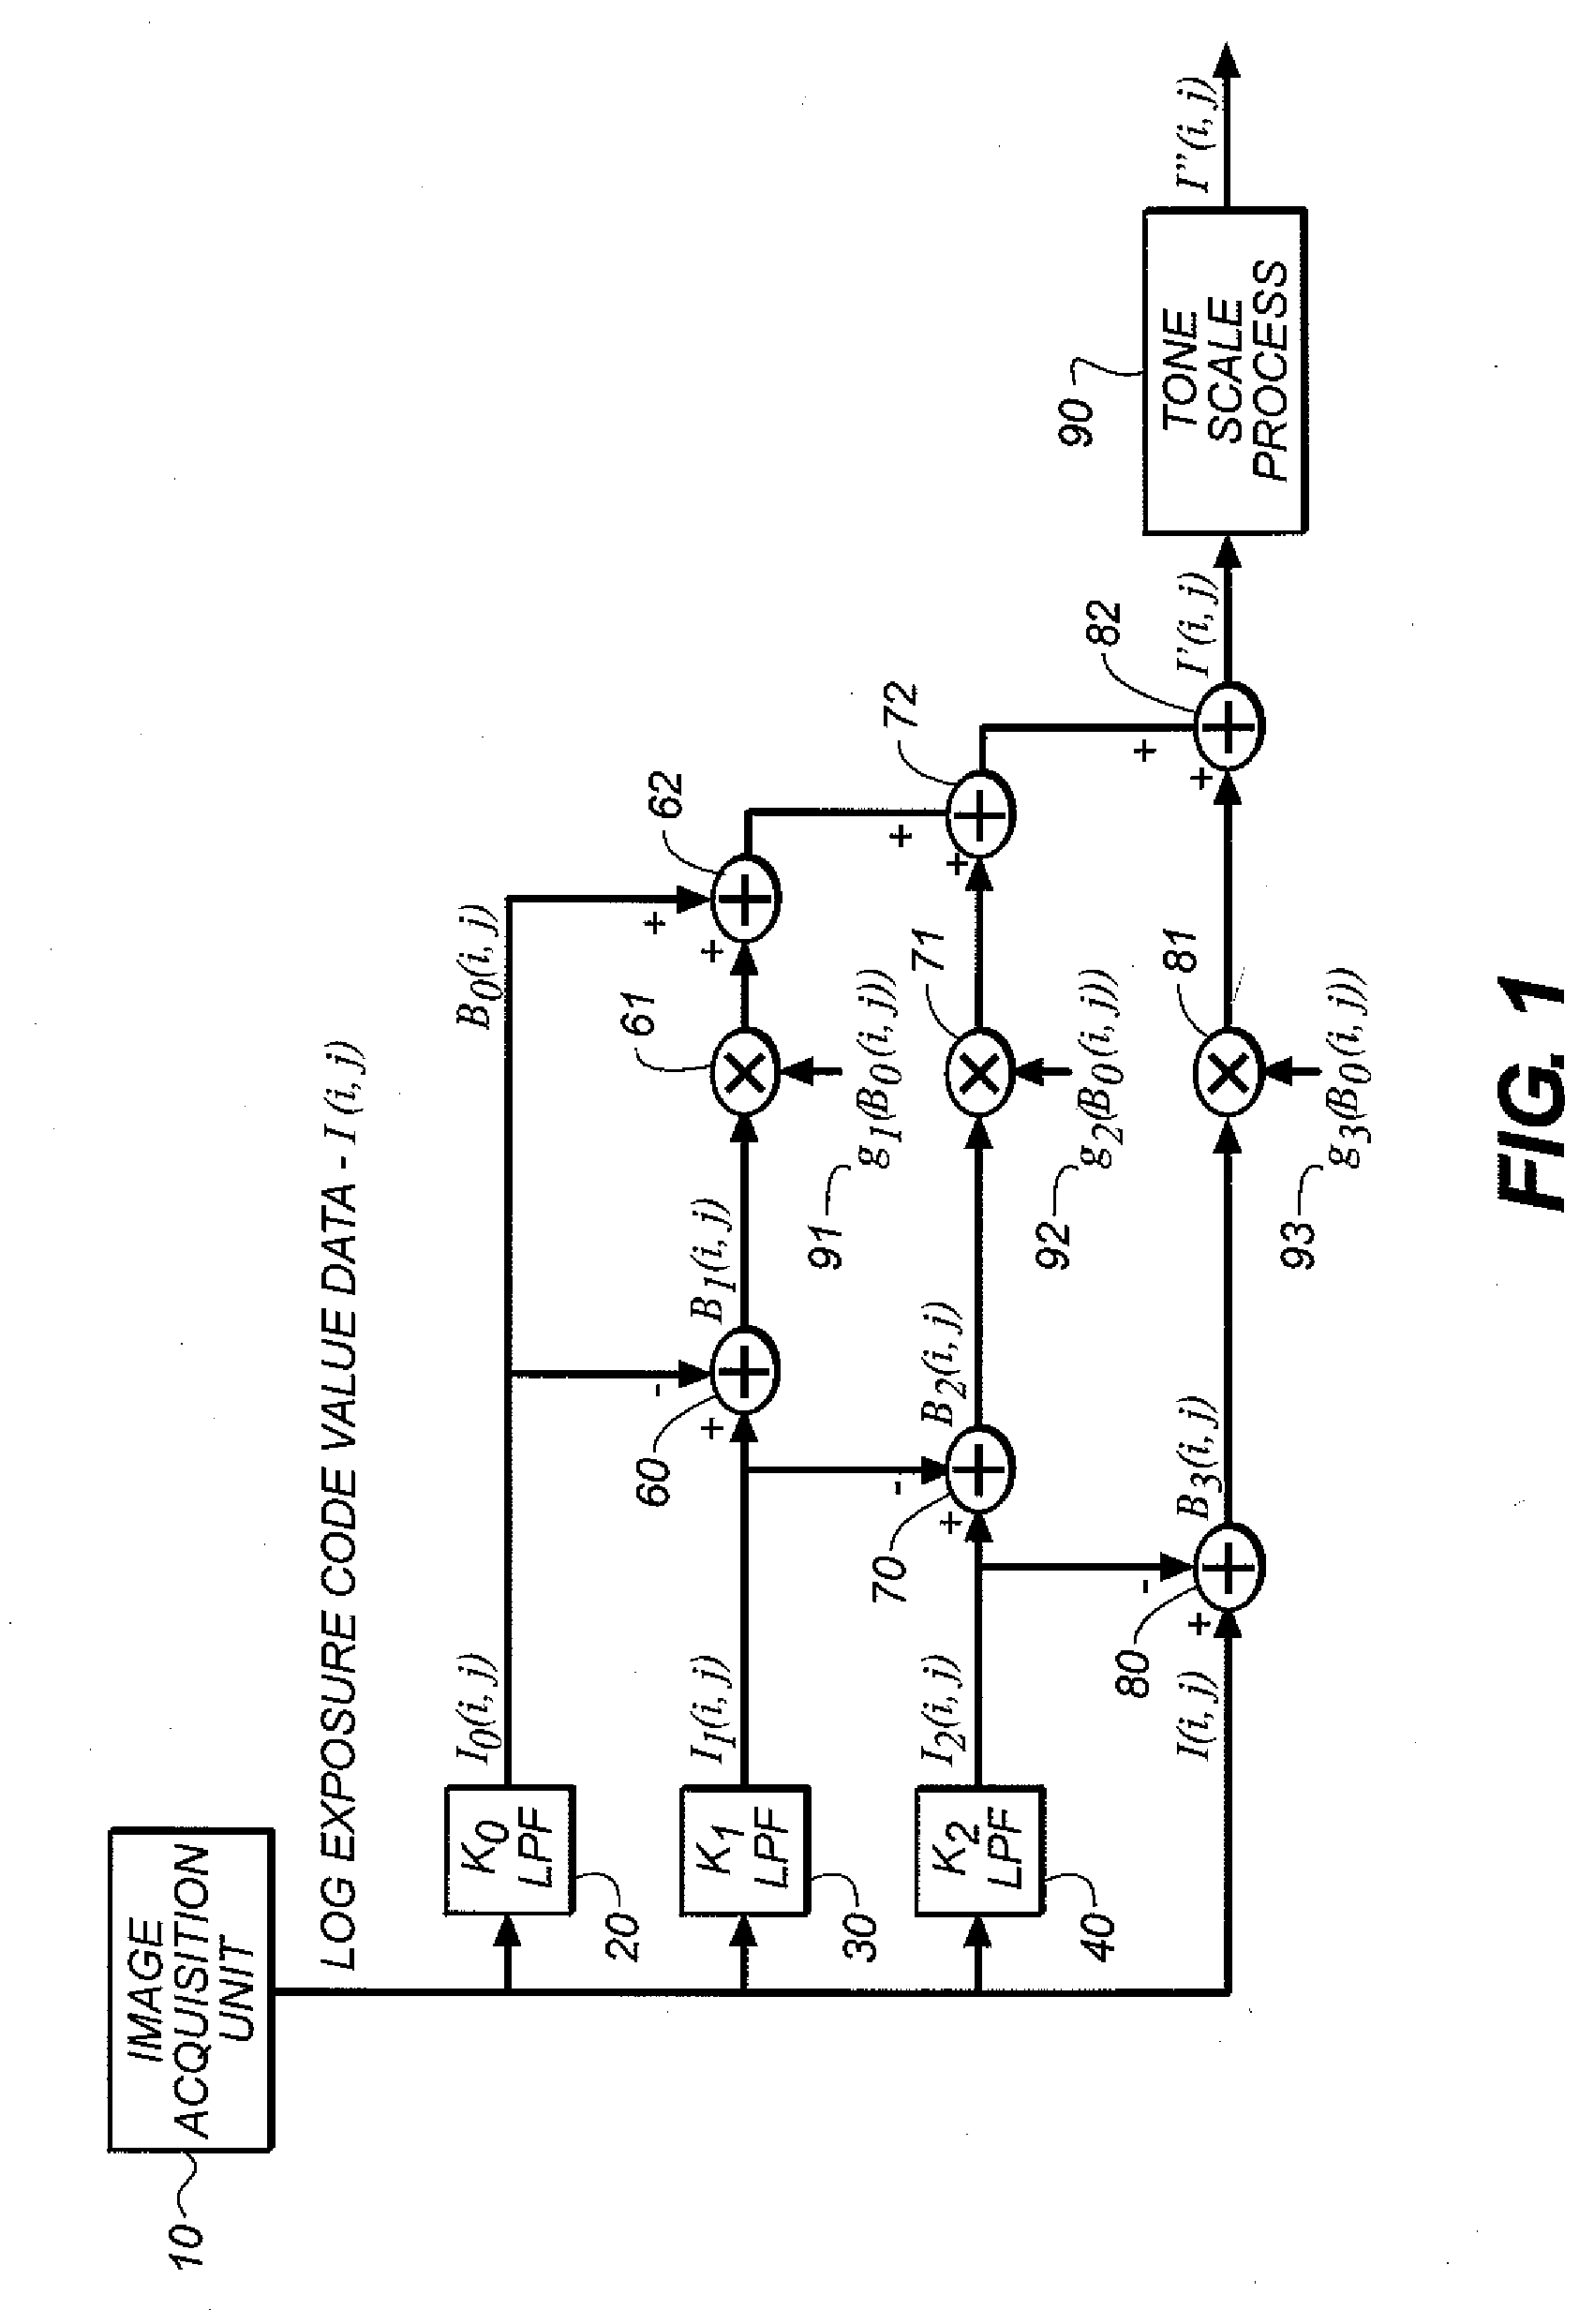 Method for rendering digital radiographic images for display based on independent control of fundamental image of quality parameters